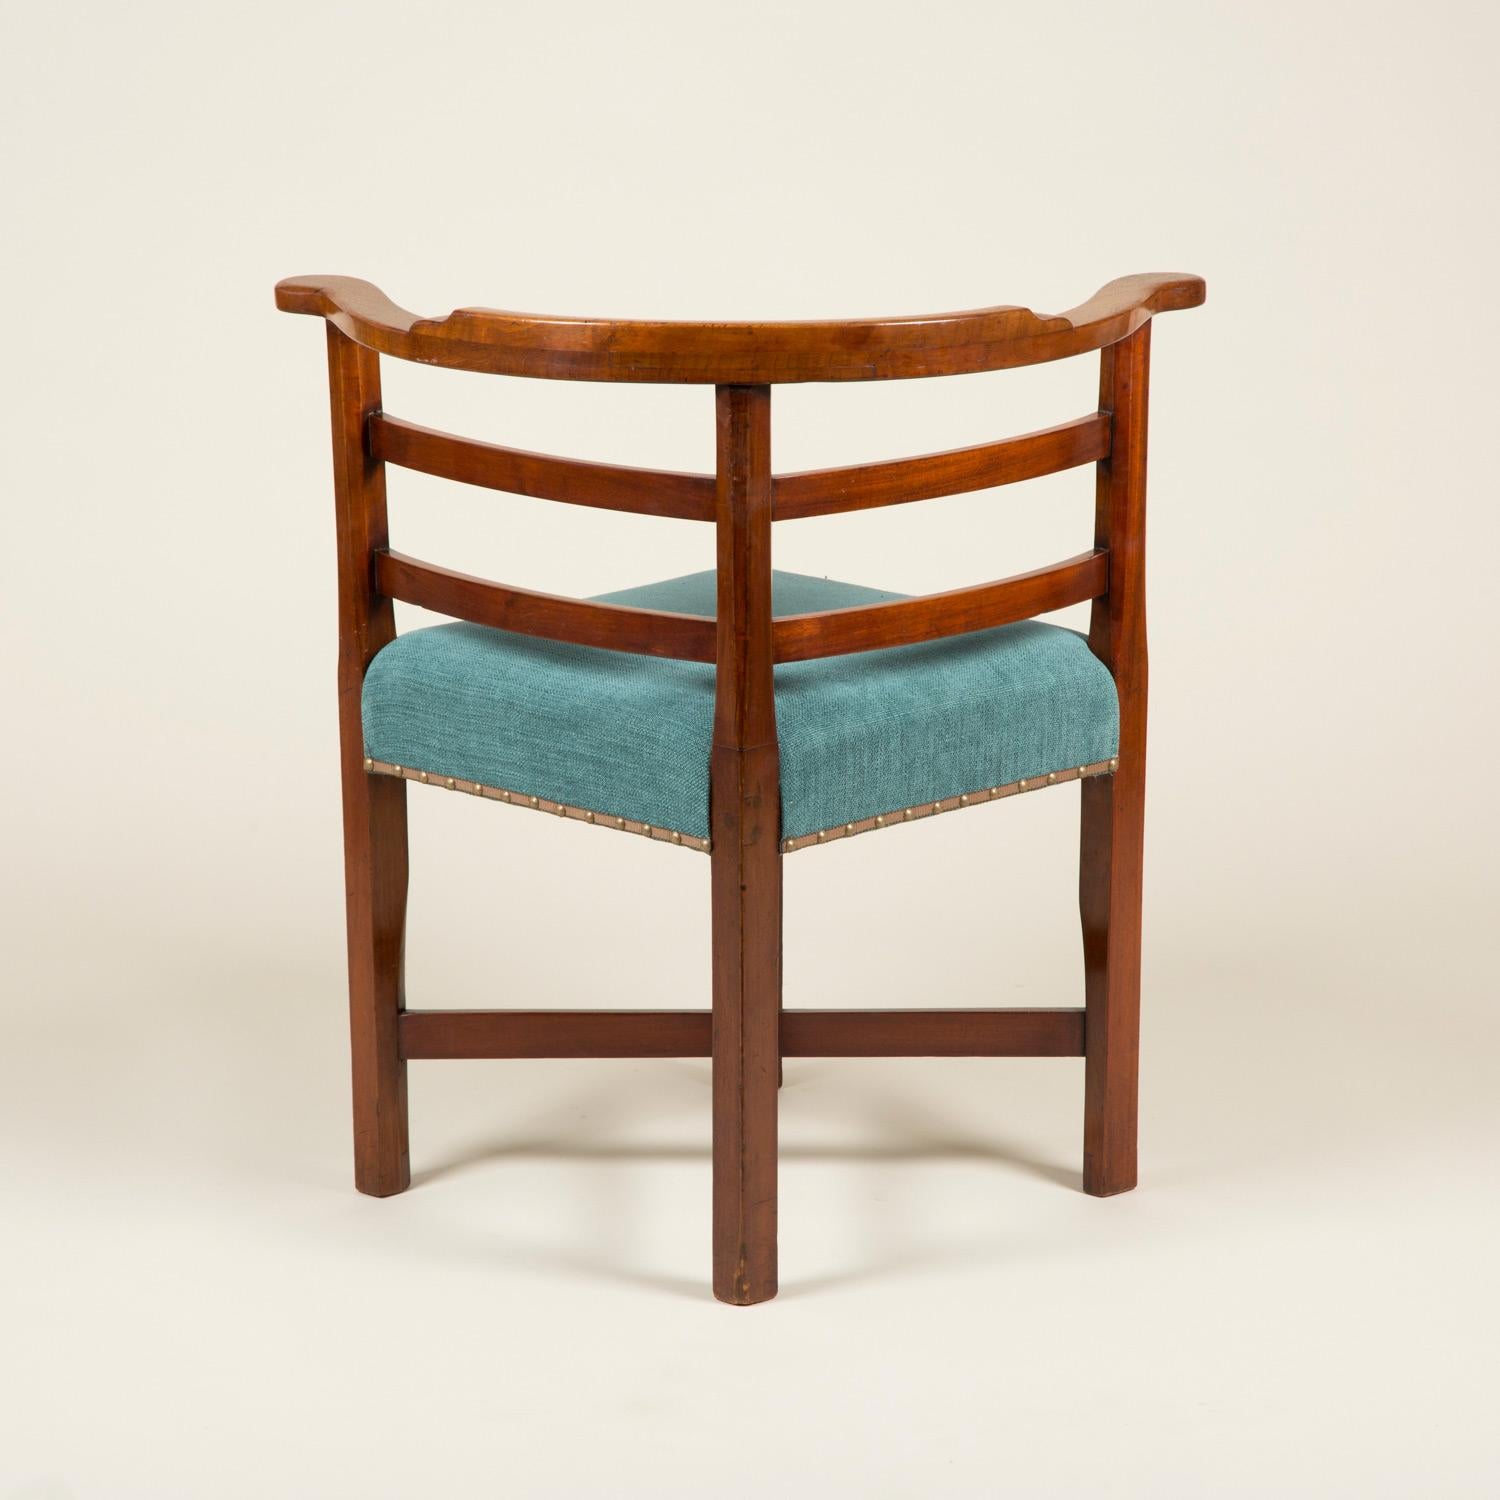 Early 19th Century Walnut Corner Chair with Simple Horizontal Back-Splats For Sale 3